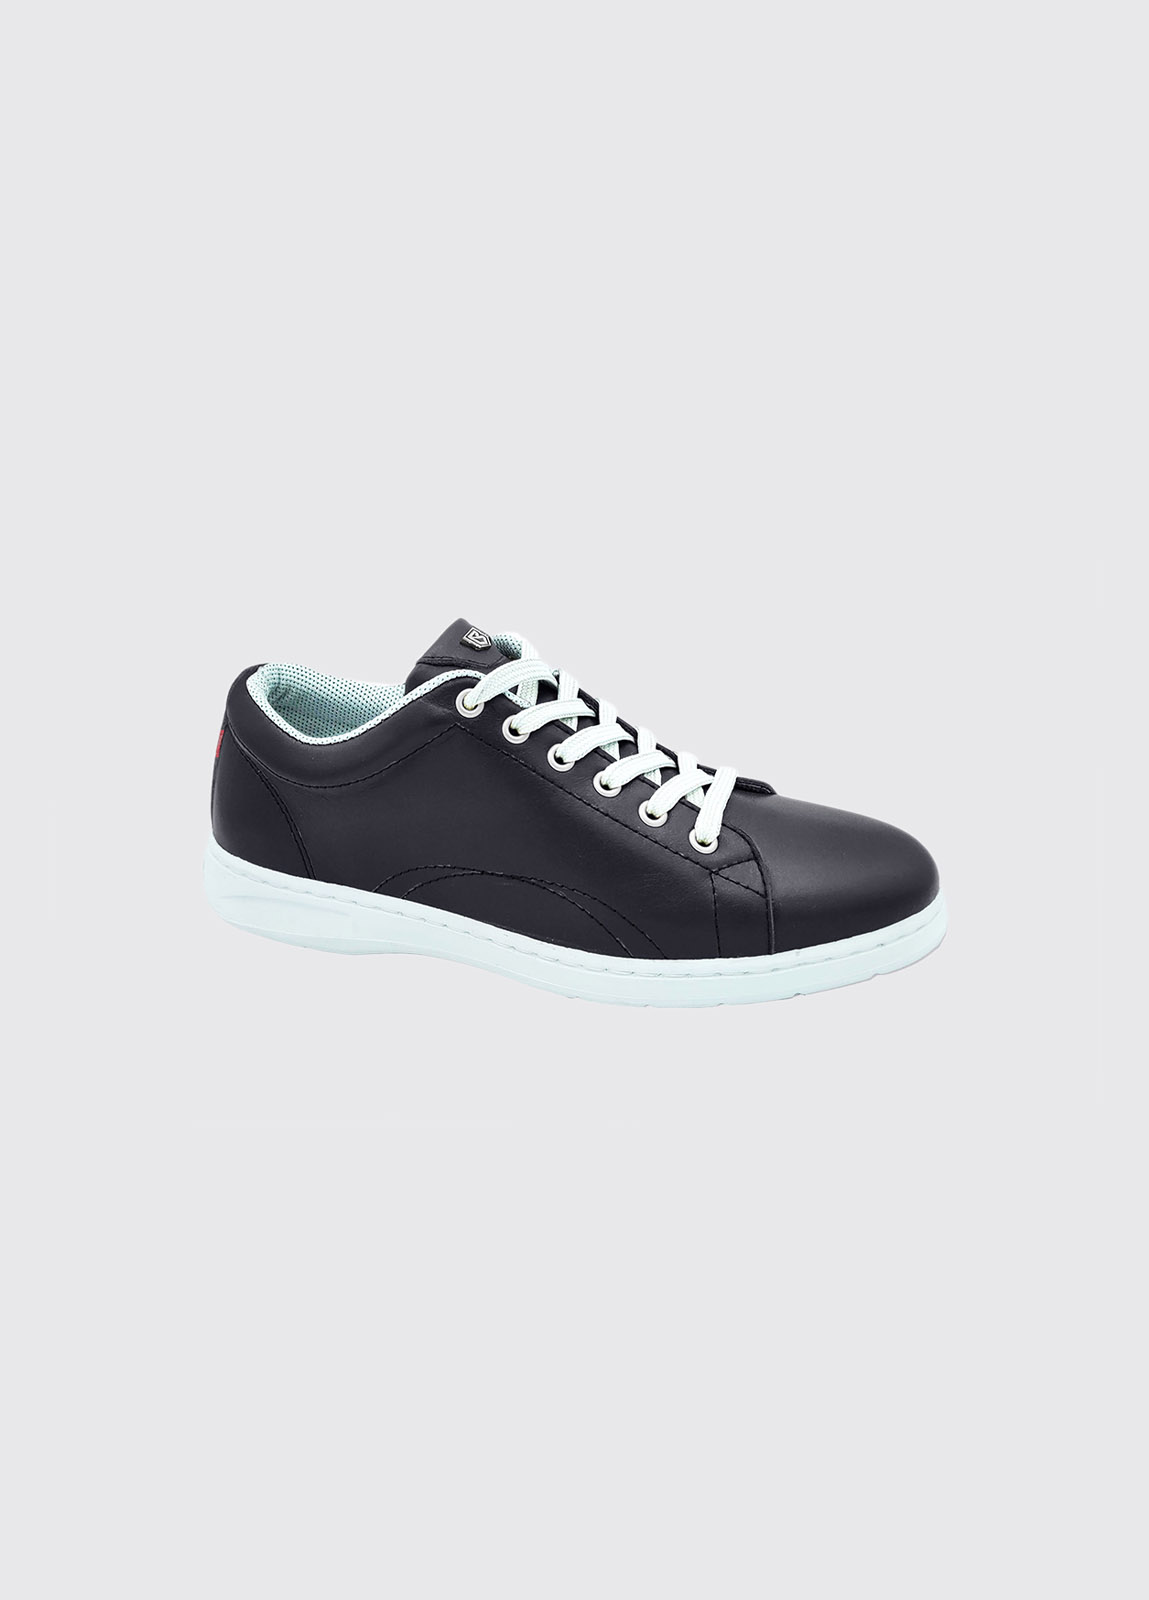 Rochelle Leather Trainer - Navy - Size EU 38